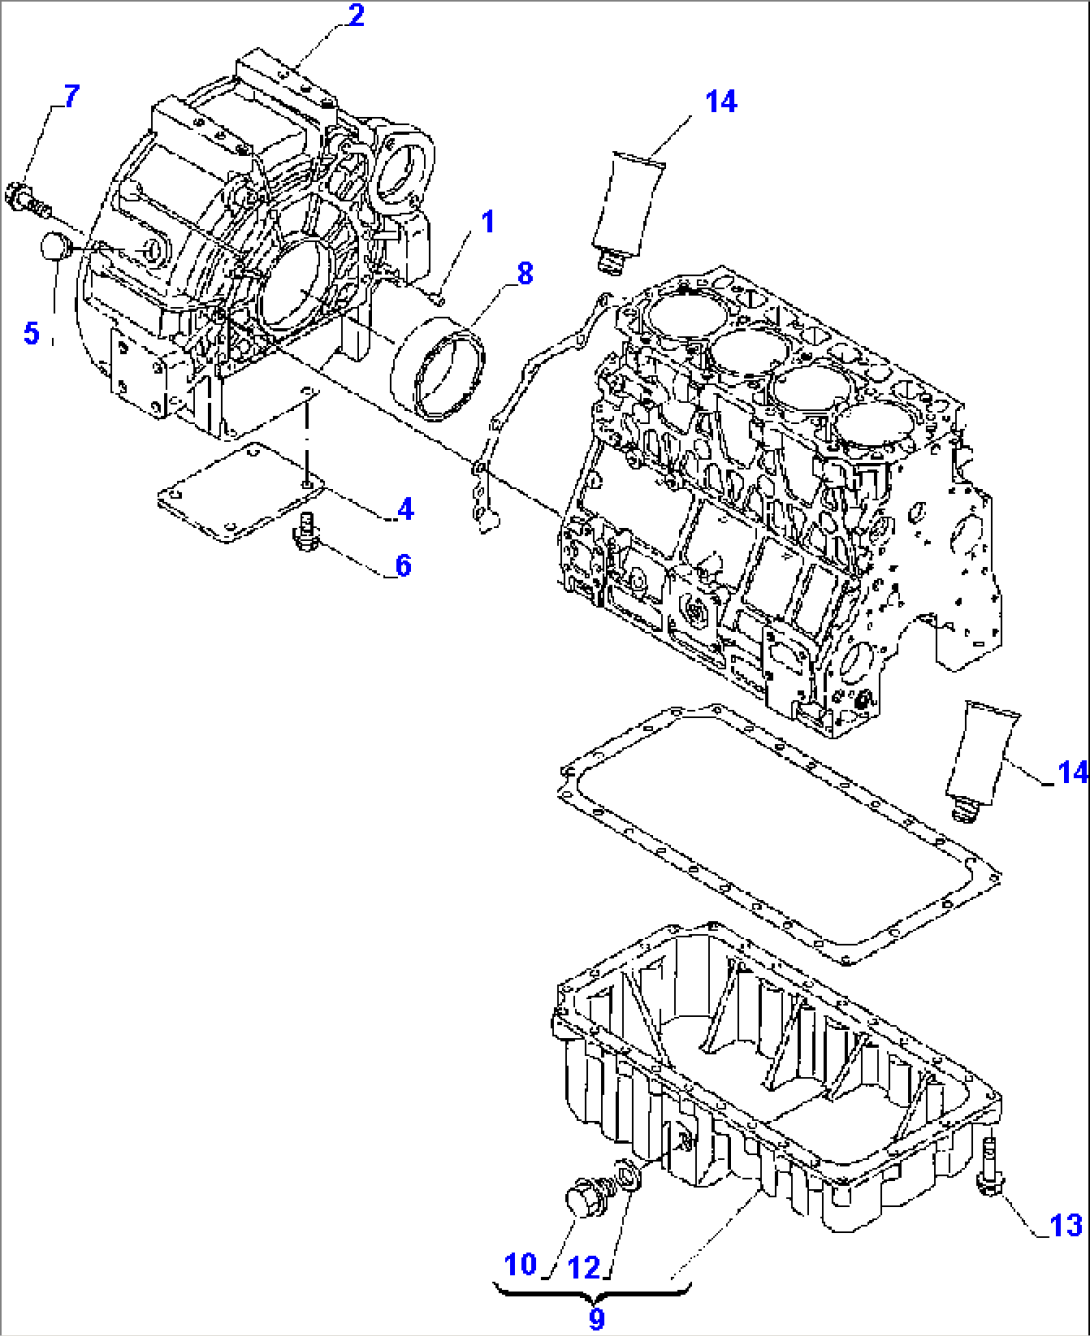 FIG. A0221-01A0 FLYWHEEL HOUSING AND OIL SUMP